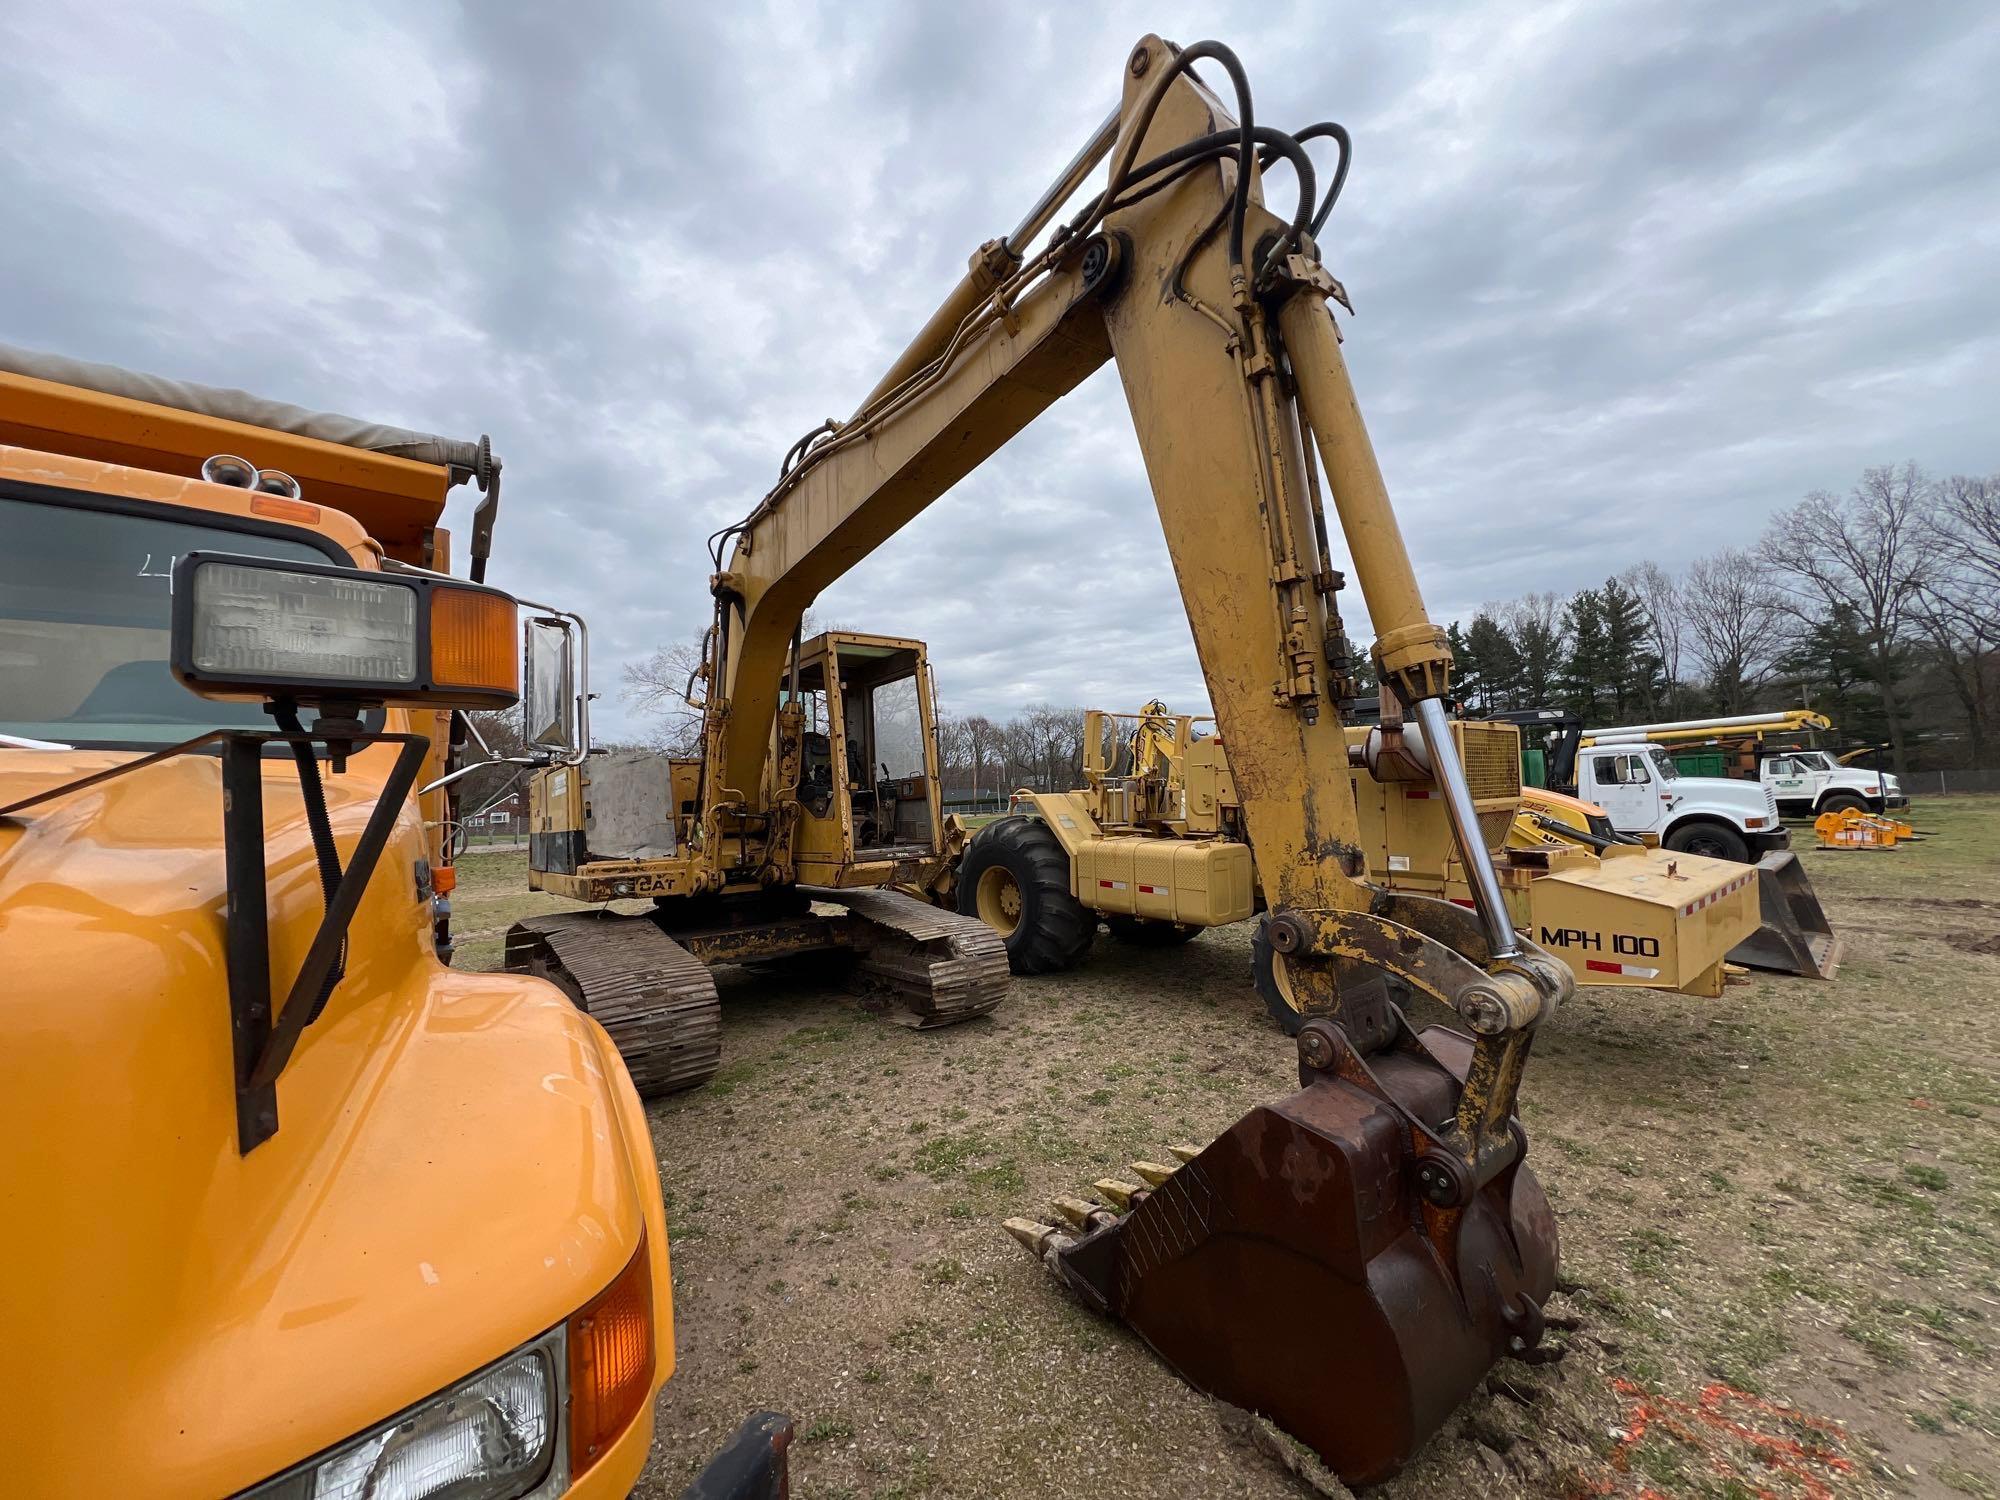 CAT 215 HYDRAULIC EXCAVATOR SN:08094 powered by Cat diesel engine, equipped with Cab, digging